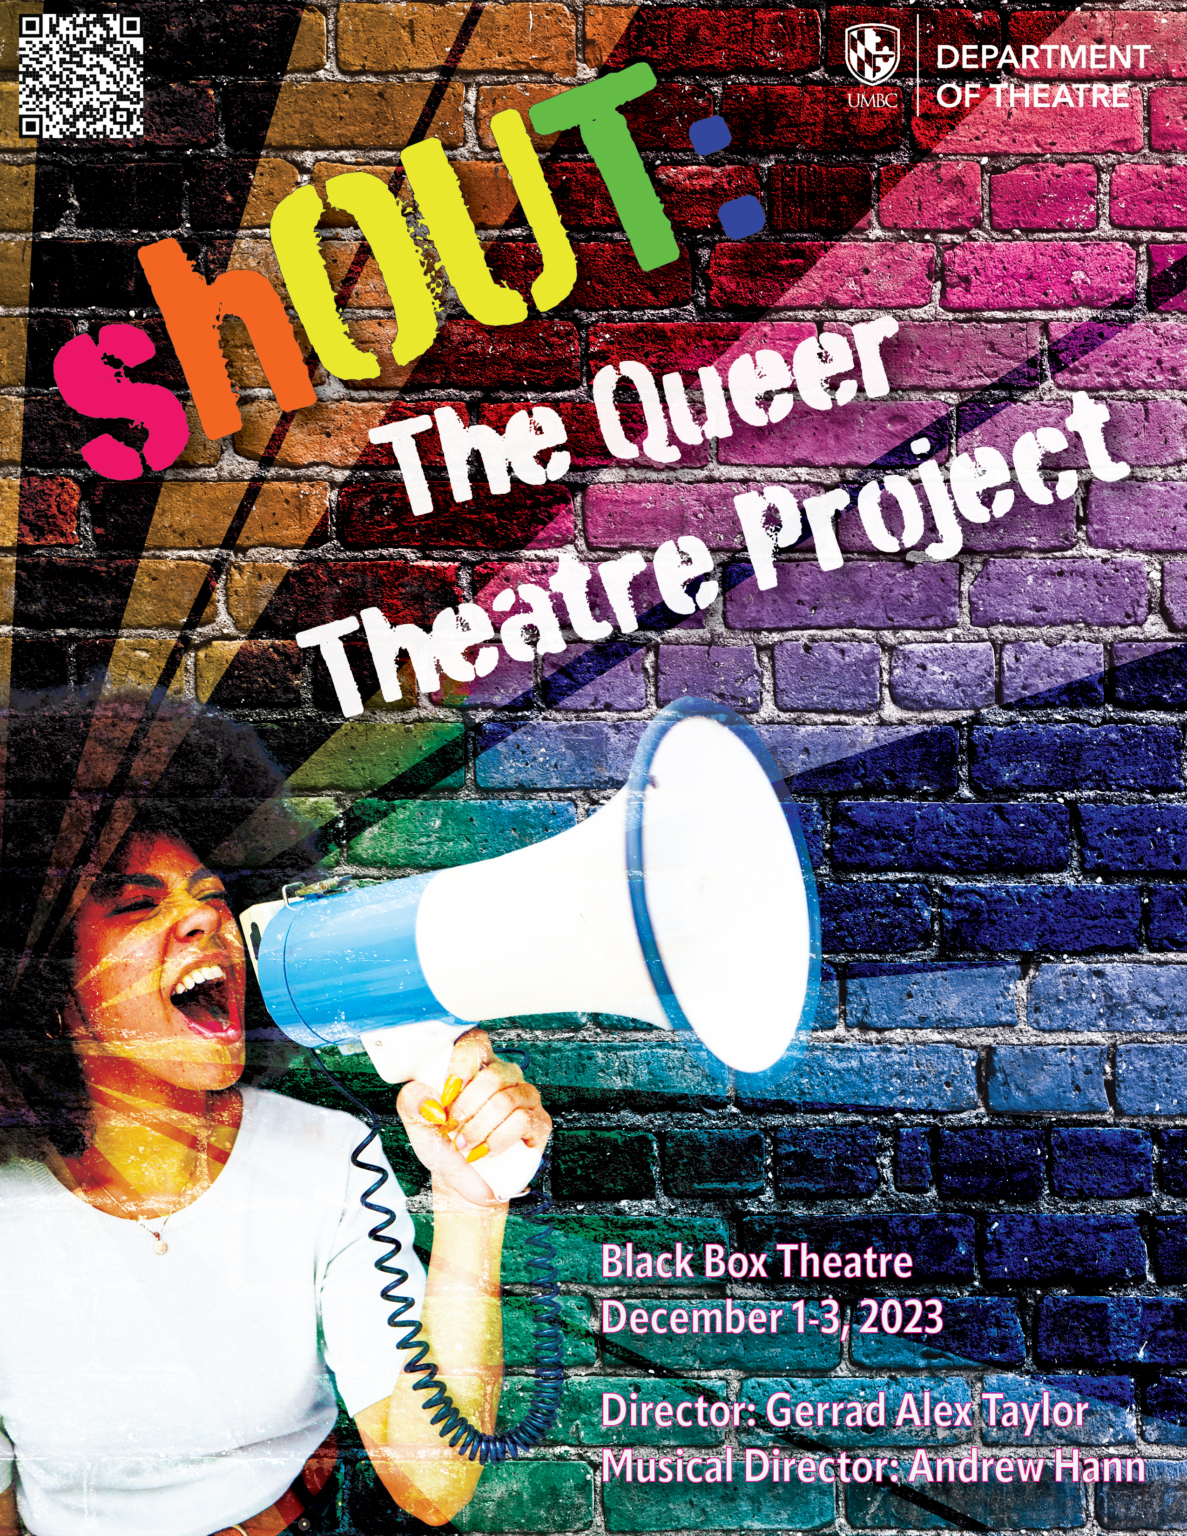 A promotional poster says shOUT: The Queer Theatre Project